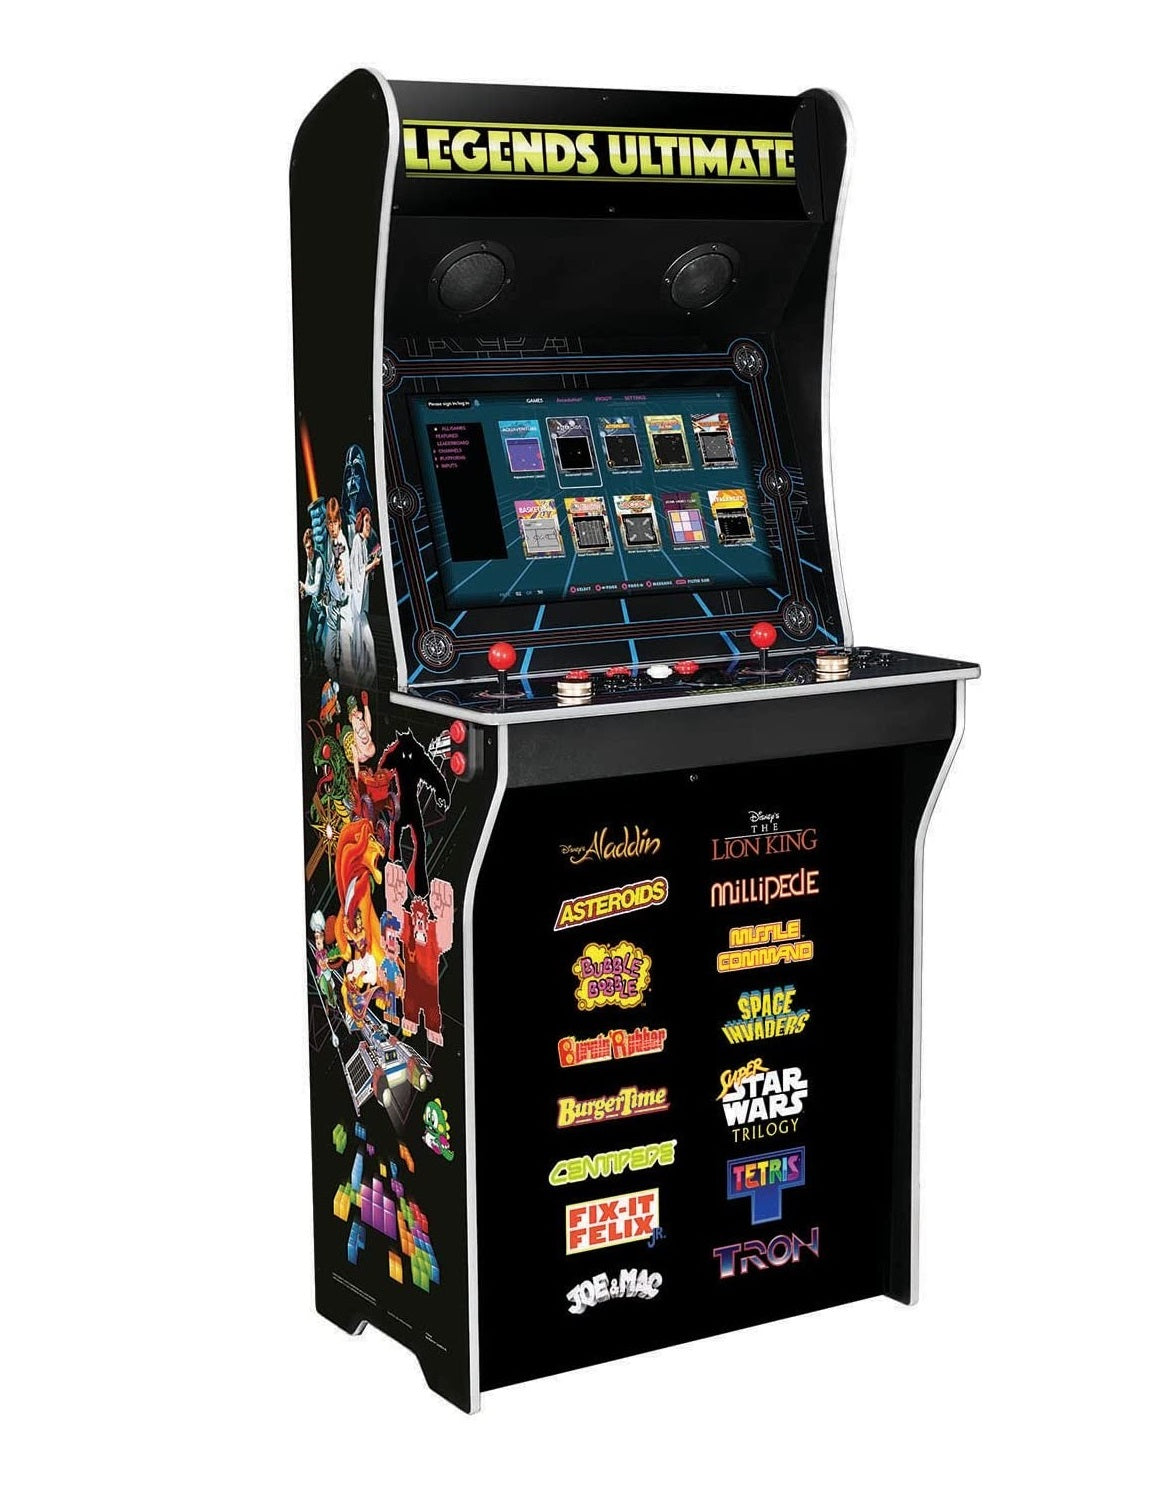 AtGames Legends Ultimate Arcade Full Size Game Machine